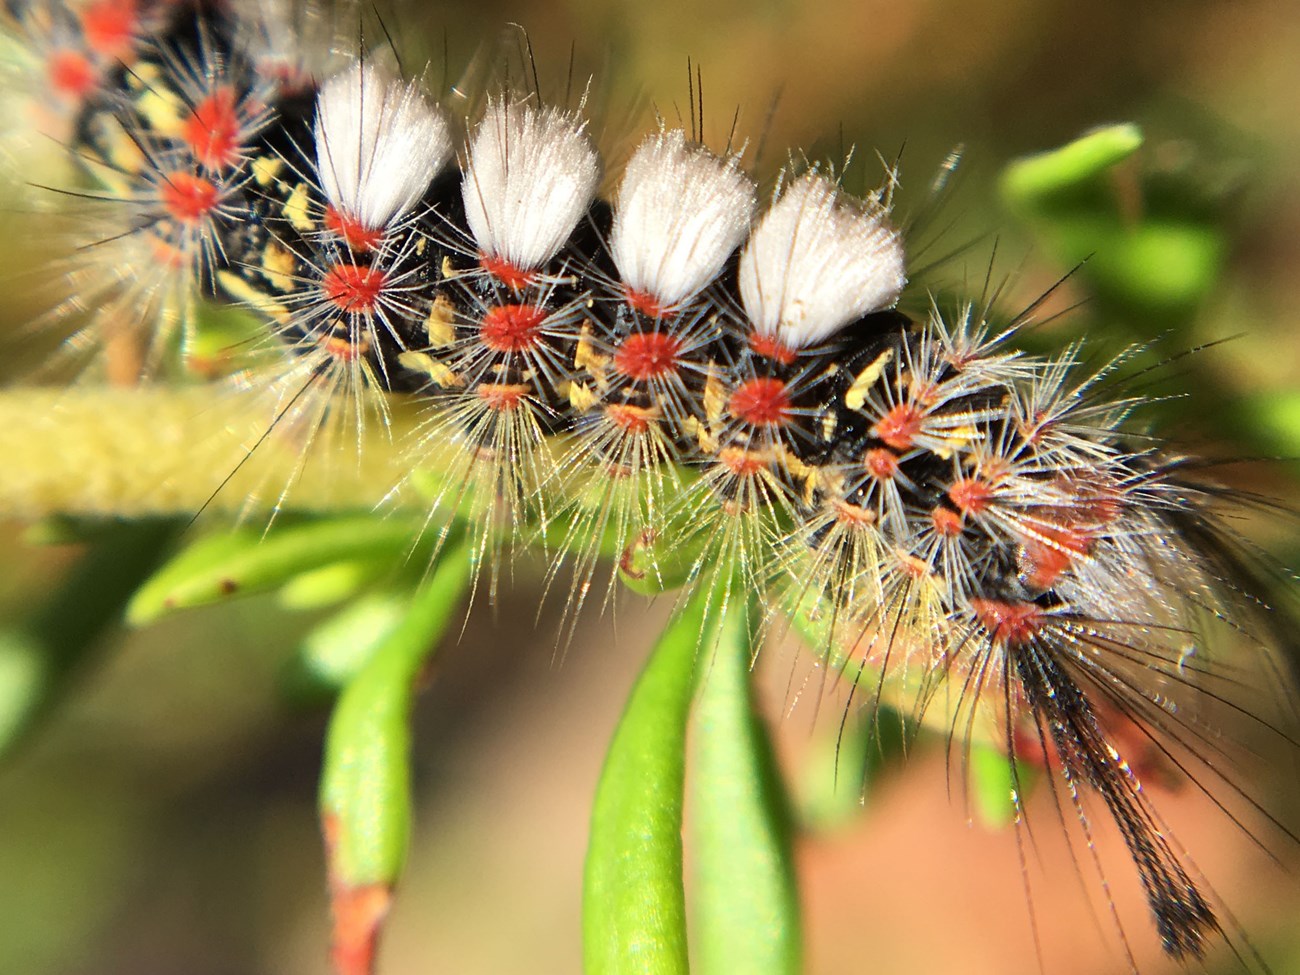 Fuzzy caterpillar with rows of bright red-orange dots and four distinctive white tufts on its back